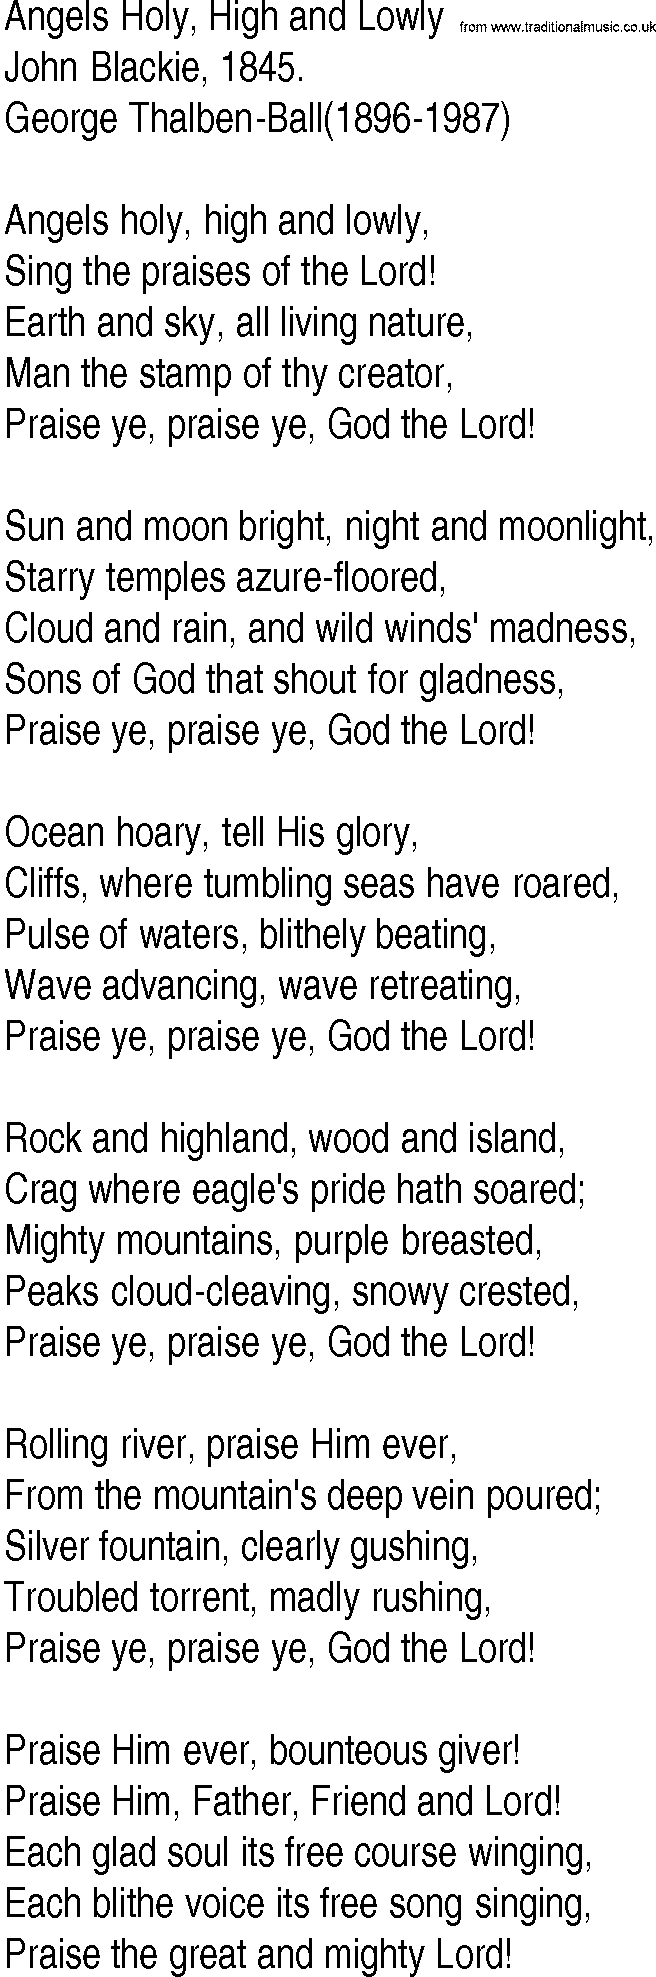 Hymn and Gospel Song: Angels Holy, High and Lowly by John Blackie lyrics